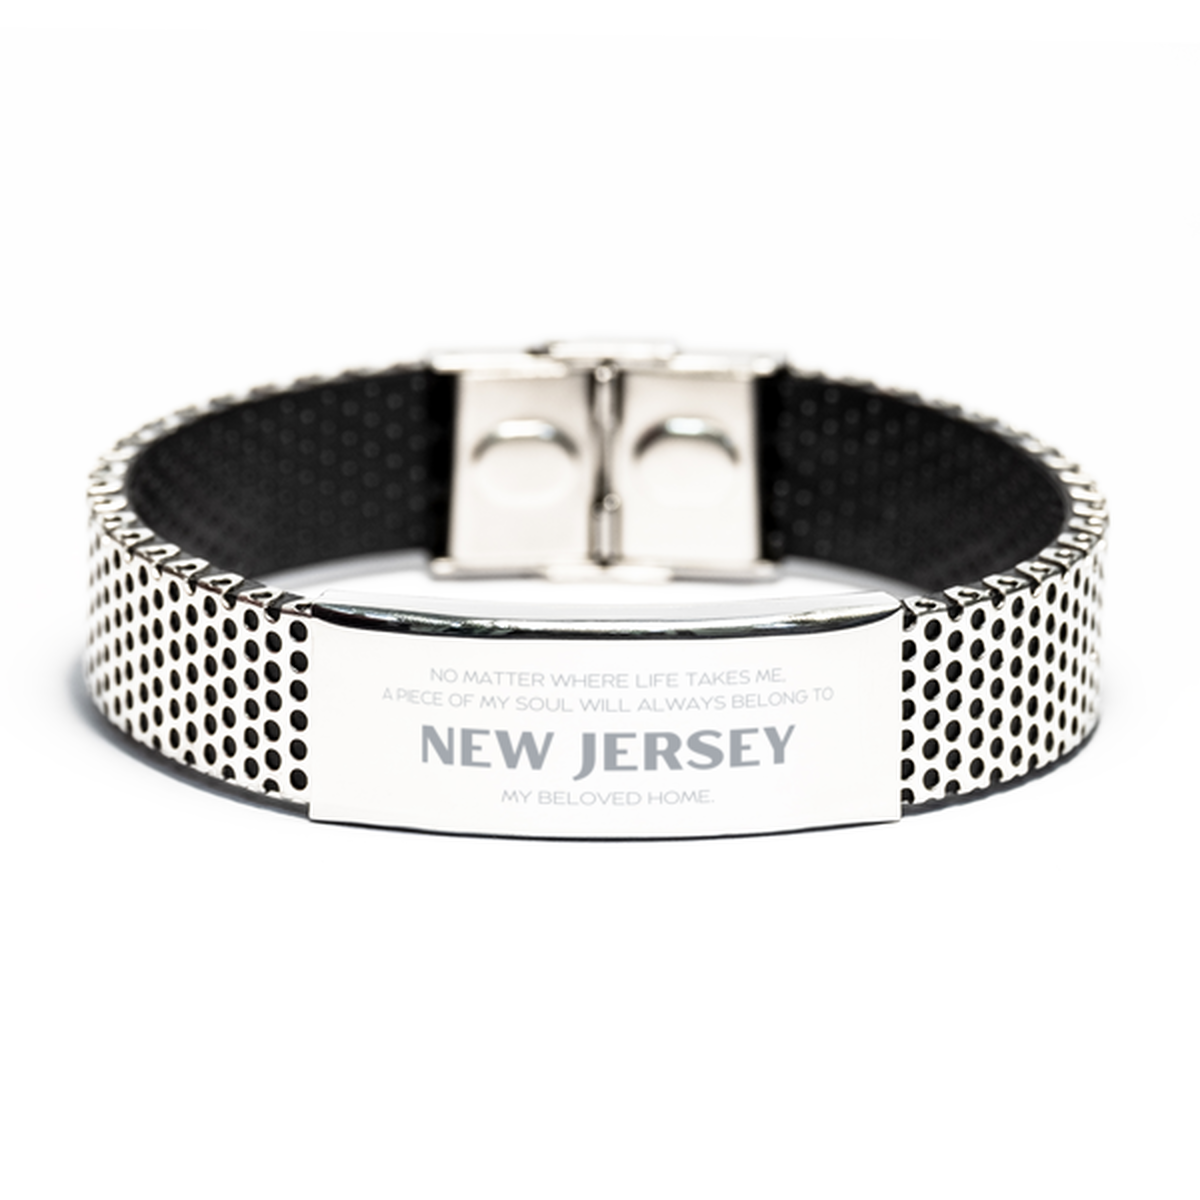 Love New Jersey State Gifts, My soul will always belong to New Jersey, Proud Stainless Steel Bracelet, Birthday Unique Gifts For New Jersey Men, Women, Friends